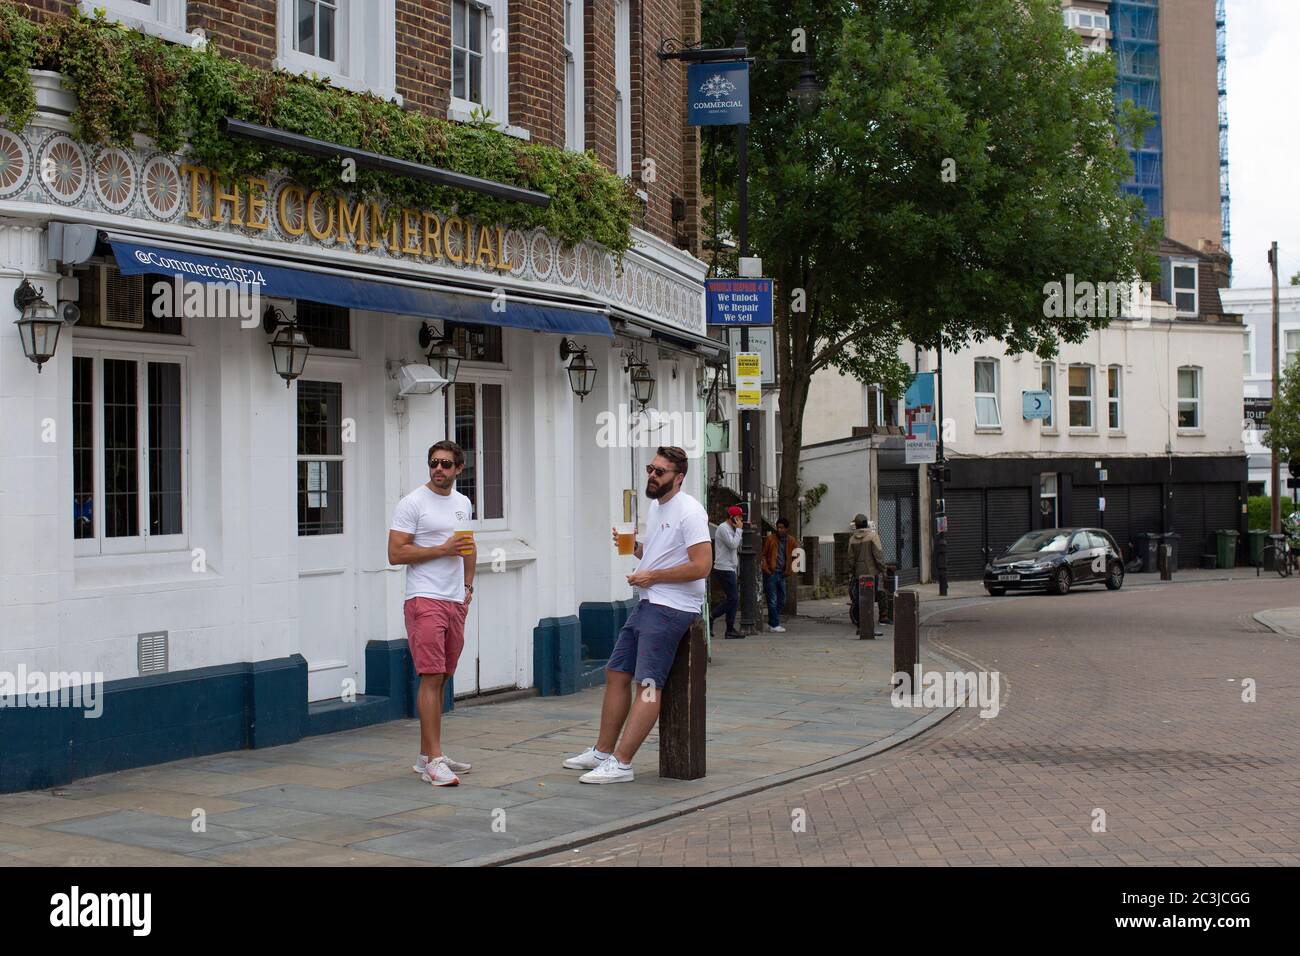 Herne Hill, London, England. 20th June 2020. Two men standing outside a pub drinking beer as non-essential businesses reopen on Railton Road next to Herne Hill Station in South London following the British government relaxing coronavirus lockdown laws significantly from Monday June 15. (photo by Sam Mellish / Alamy Live News Stock Photo